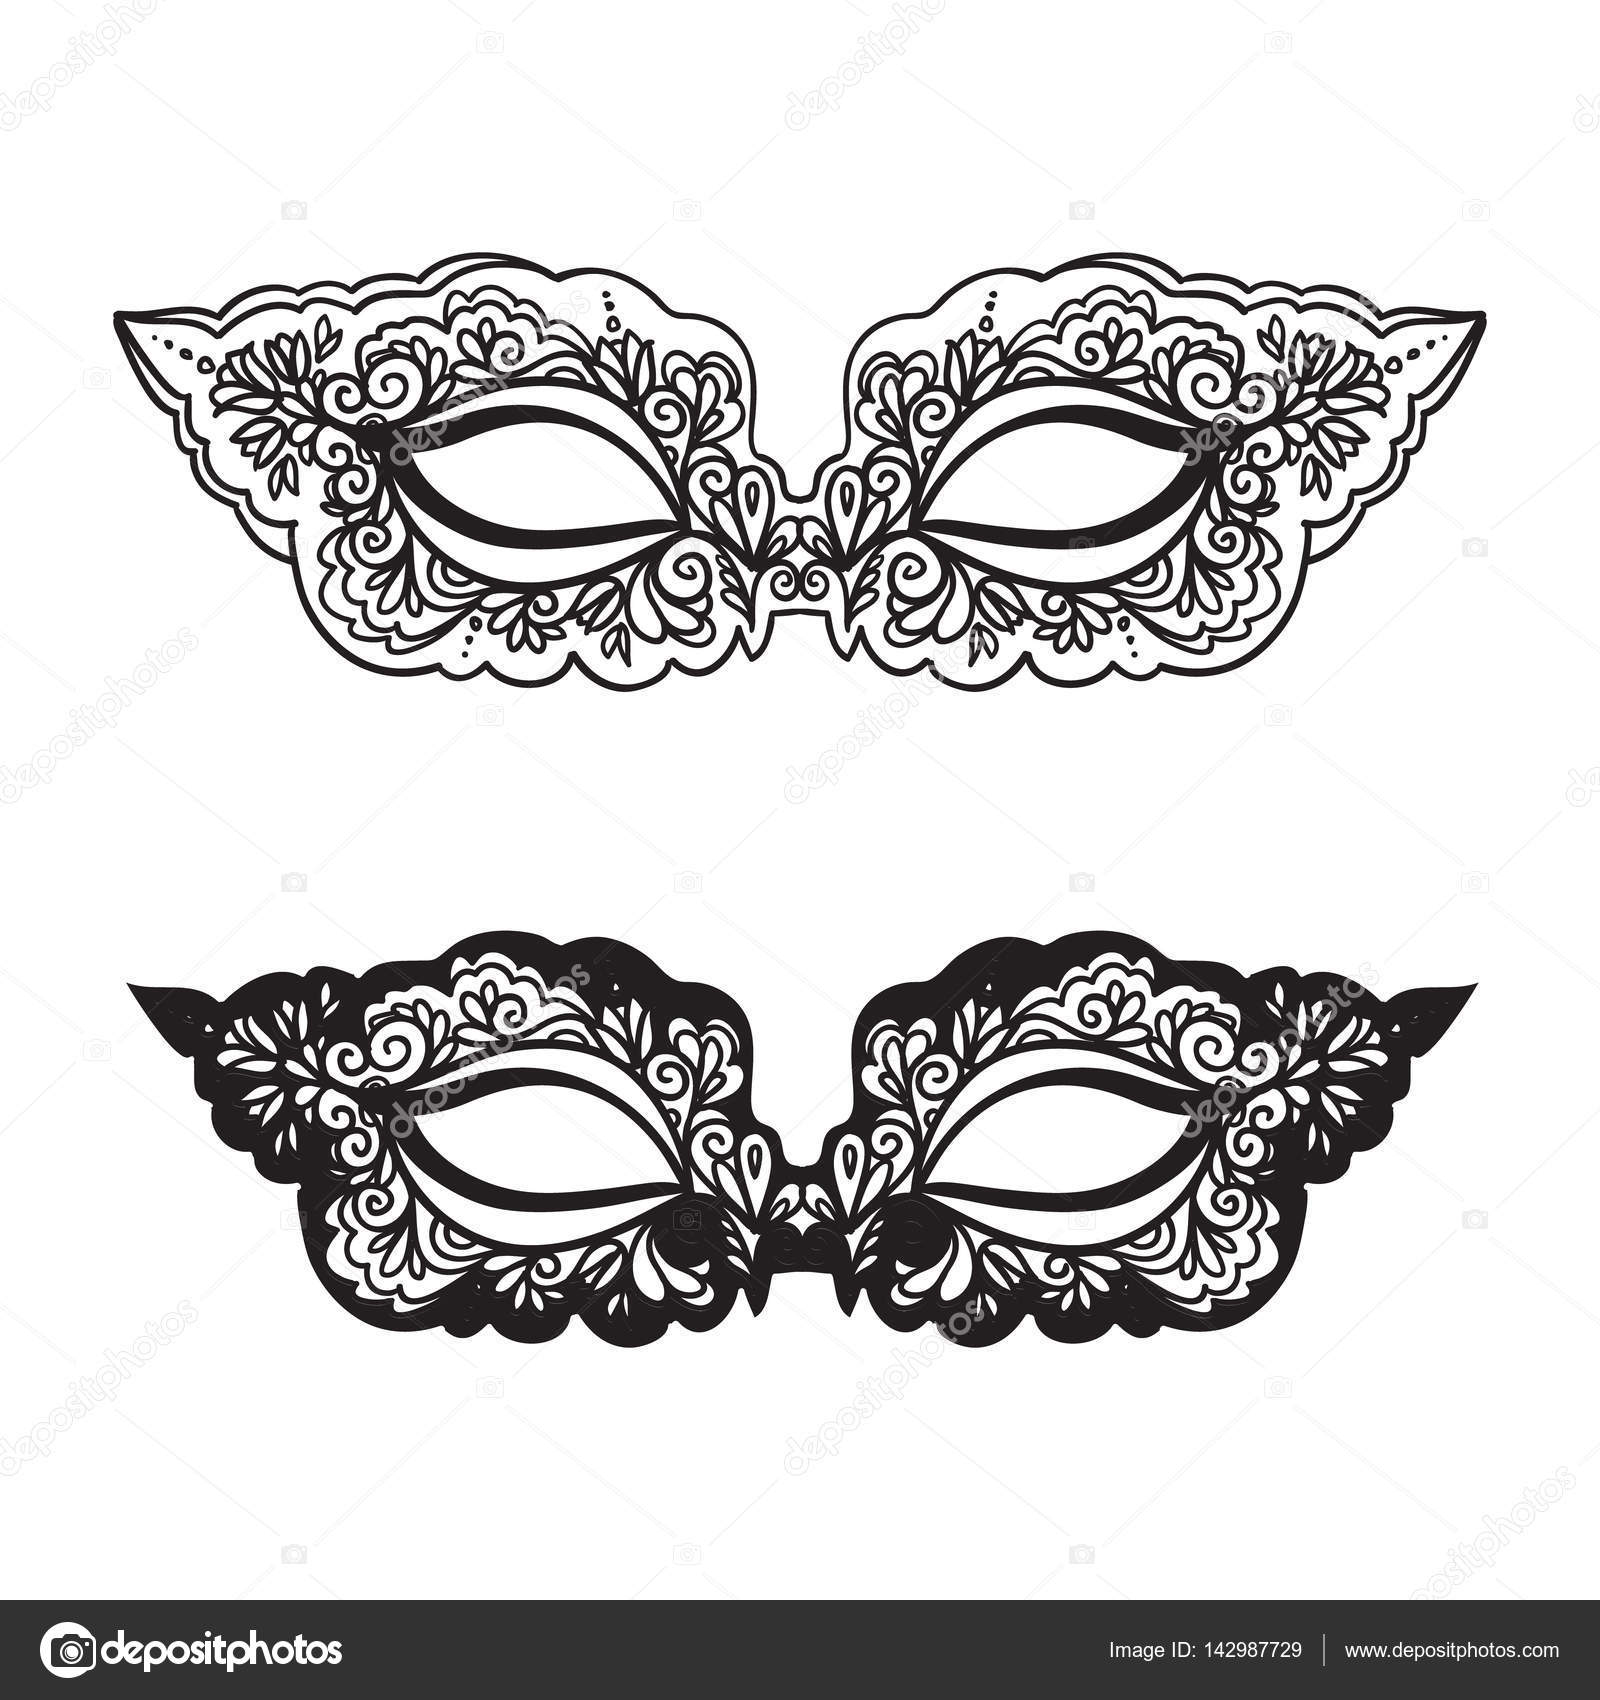 2 871 Lace Mask Vector Images Lace Mask Illustrations Depositphotos